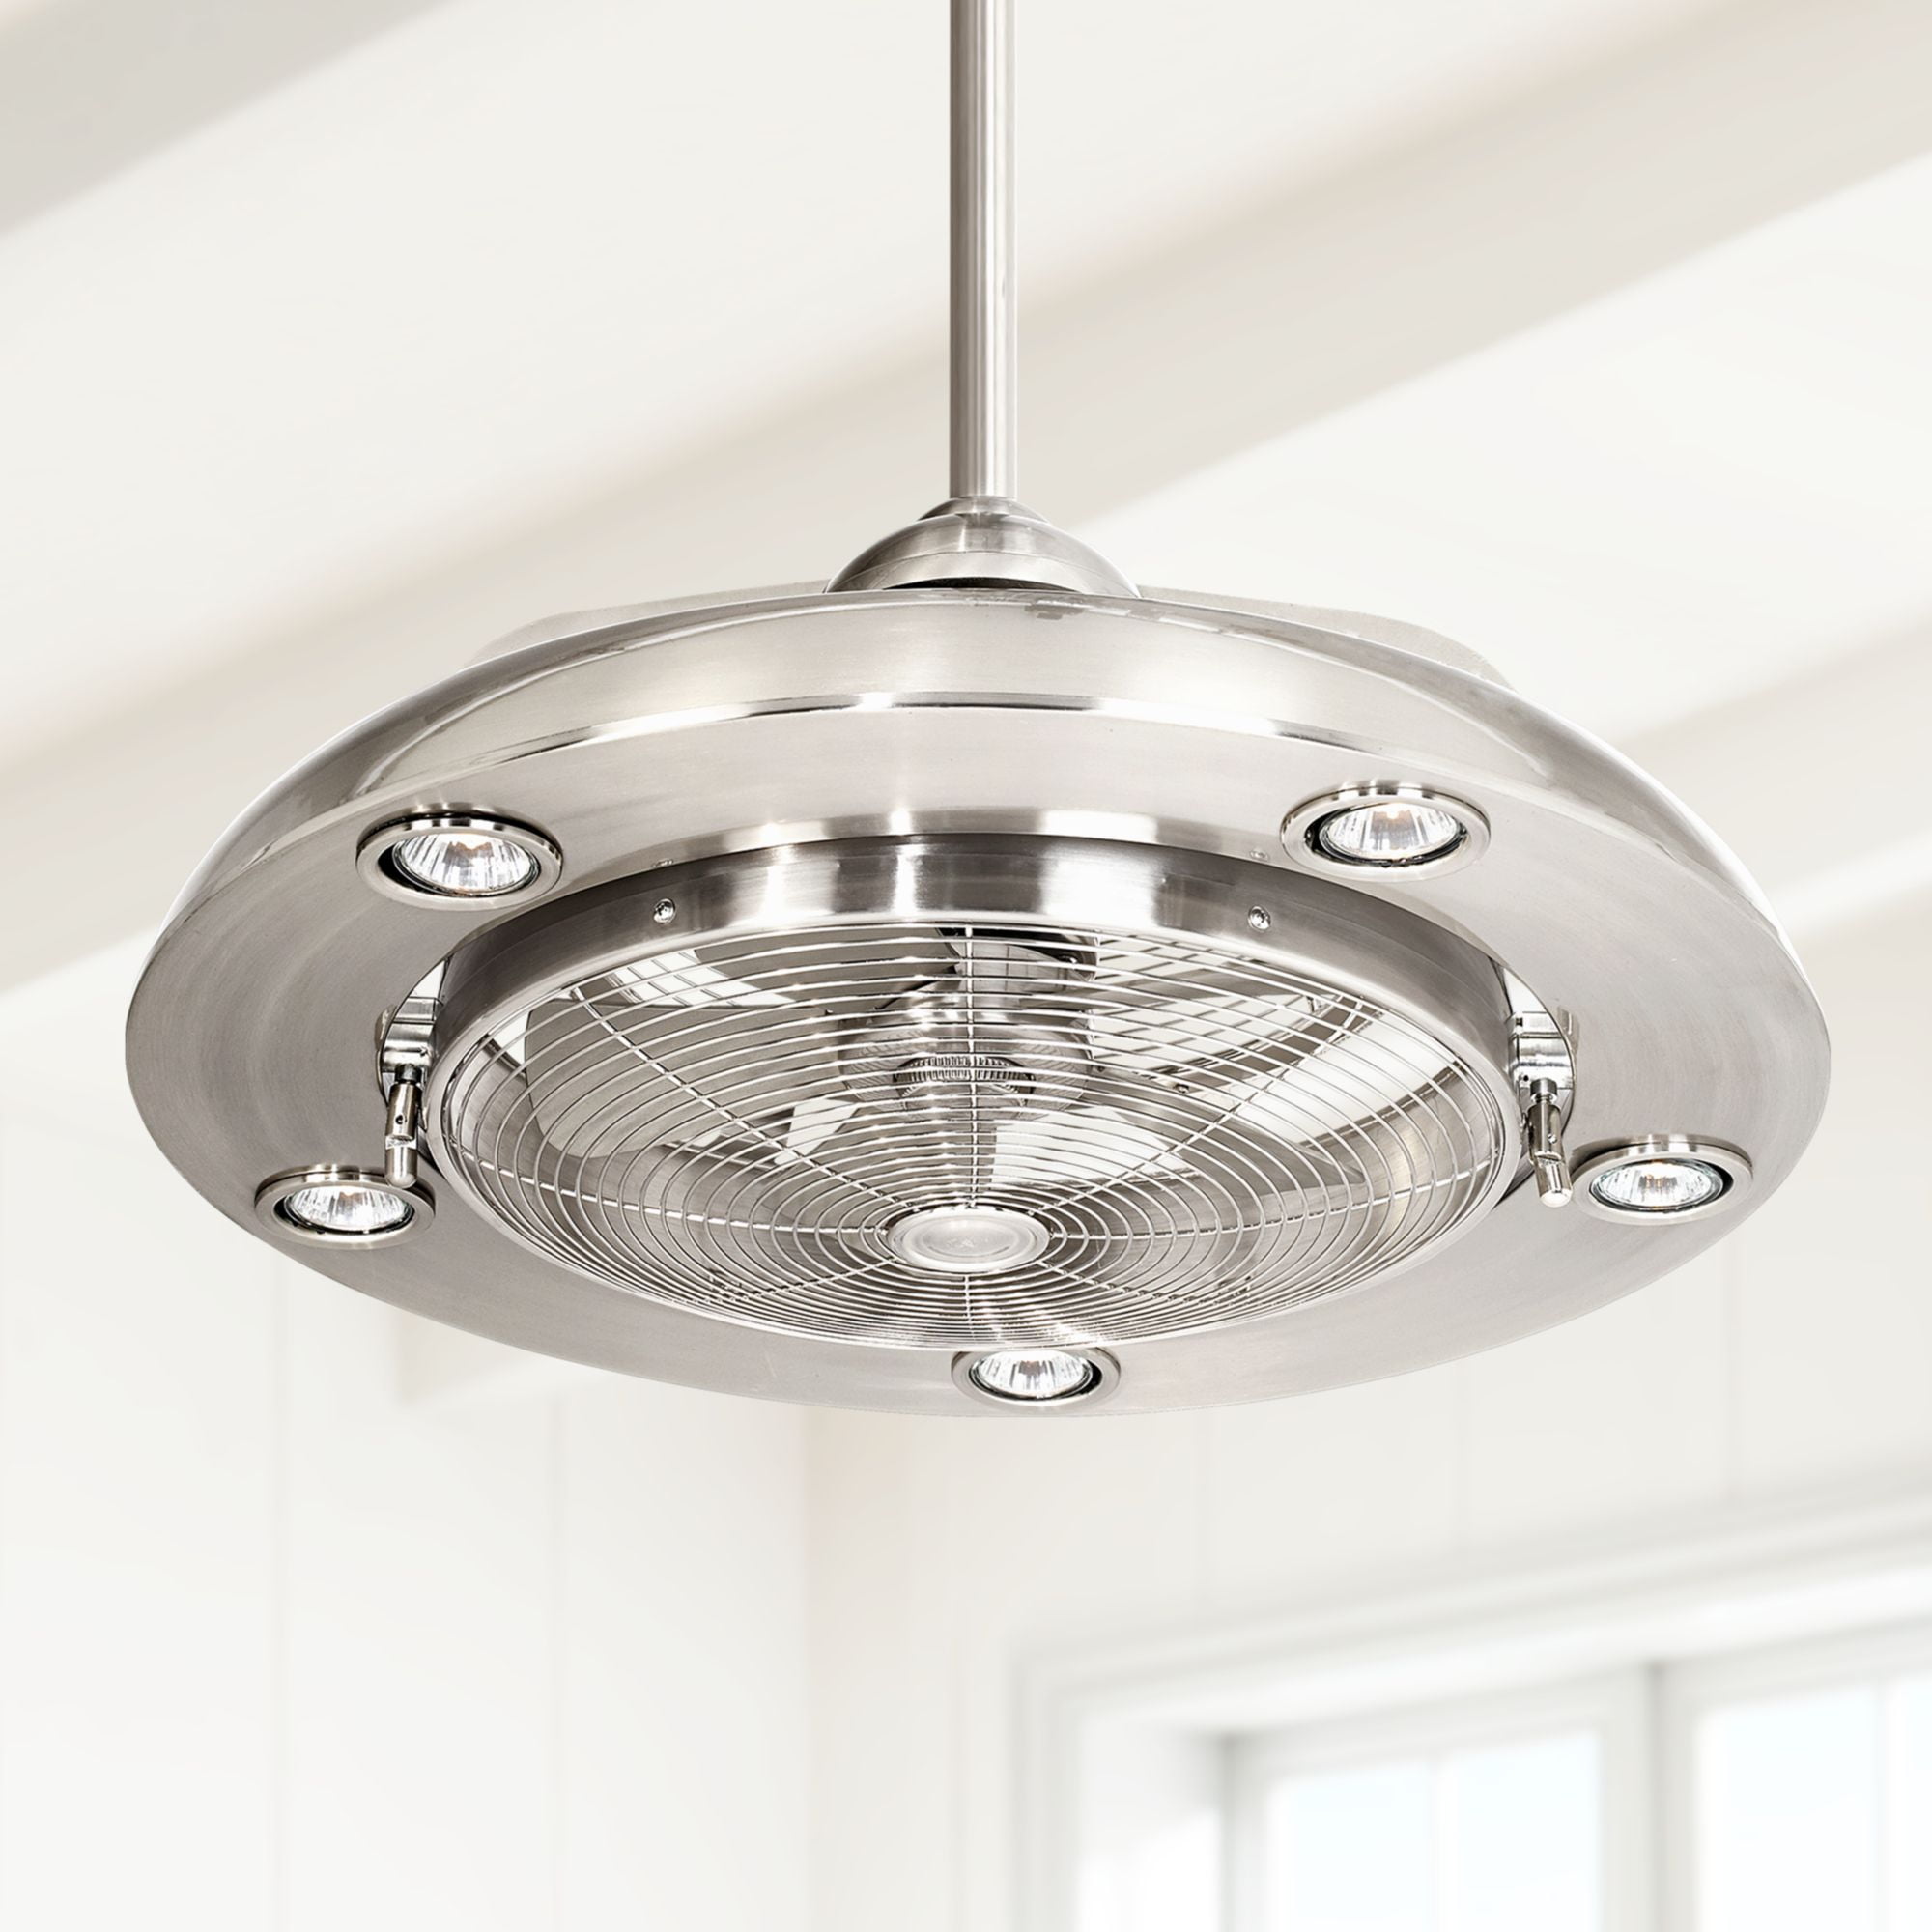 Modern Ceiling Fans With Lights Uk - cool unusual ceiling lights uk 30 unusual ceiling fans uk ... - Lighting for ceiling fans varies from led to compact fluorescent, incadescent, and candelabra bulbs.